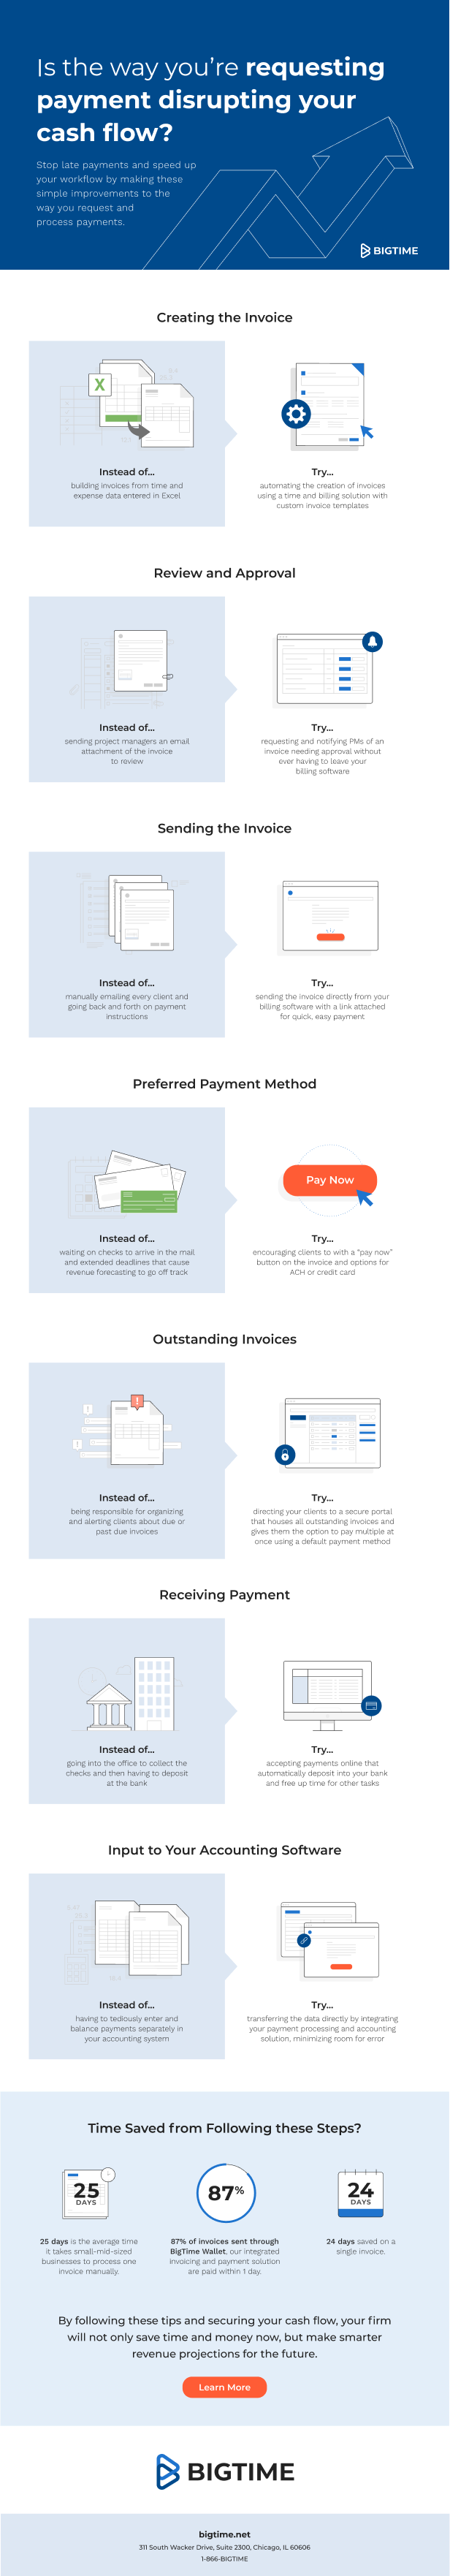 V2 - Is the Way Youre Requesting Payment Disrupting Cash Flow_ (2)